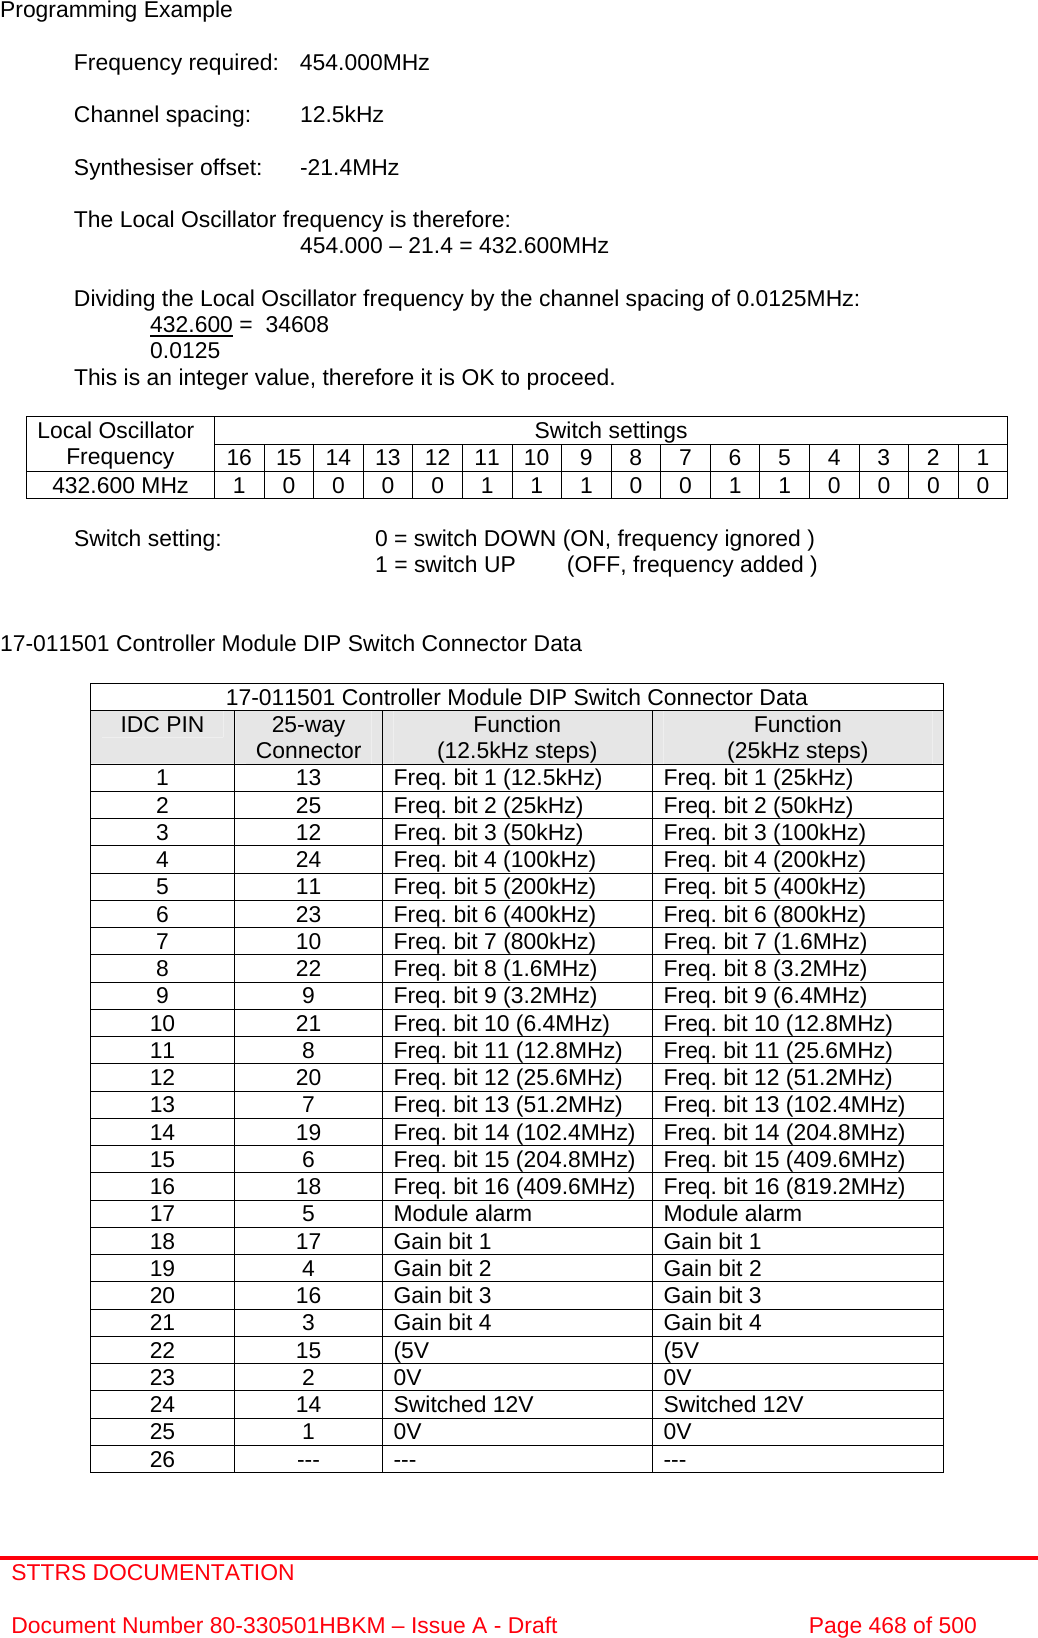 STTRS DOCUMENTATION  Document Number 80-330501HBKM – Issue A - Draft  Page 468 of 500   Programming Example  Frequency required:  454.000MHz  Channel spacing:  12.5kHz  Synthesiser offset:  -21.4MHz  The Local Oscillator frequency is therefore:         454.000 – 21.4 = 432.600MHz  Dividing the Local Oscillator frequency by the channel spacing of 0.0125MHz:    432.600 =  34608     0.0125 This is an integer value, therefore it is OK to proceed.  Switch settings Local Oscillator Frequency  16 15 14 13 12 11 10 9 8 7 6 5 4 3 2 1 432.600 MHz  1 0 0 0 0 1 1 1 0 0 1 1 0 0 0 0  Switch setting:     0 = switch DOWN (ON, frequency ignored )          1 = switch UP        (OFF, frequency added )   17-011501 Controller Module DIP Switch Connector Data  17-011501 Controller Module DIP Switch Connector Data IDC PIN  25-way Connector  Function (12.5kHz steps)  Function (25kHz steps) 1  13  Freq. bit 1 (12.5kHz)  Freq. bit 1 (25kHz) 2  25  Freq. bit 2 (25kHz)  Freq. bit 2 (50kHz) 3  12  Freq. bit 3 (50kHz)  Freq. bit 3 (100kHz) 4  24  Freq. bit 4 (100kHz)  Freq. bit 4 (200kHz) 5  11  Freq. bit 5 (200kHz)  Freq. bit 5 (400kHz) 6  23  Freq. bit 6 (400kHz)  Freq. bit 6 (800kHz) 7  10  Freq. bit 7 (800kHz)  Freq. bit 7 (1.6MHz) 8  22  Freq. bit 8 (1.6MHz)  Freq. bit 8 (3.2MHz) 9  9  Freq. bit 9 (3.2MHz)  Freq. bit 9 (6.4MHz) 10  21  Freq. bit 10 (6.4MHz)  Freq. bit 10 (12.8MHz) 11  8  Freq. bit 11 (12.8MHz)  Freq. bit 11 (25.6MHz) 12  20  Freq. bit 12 (25.6MHz)  Freq. bit 12 (51.2MHz) 13  7  Freq. bit 13 (51.2MHz)  Freq. bit 13 (102.4MHz) 14  19  Freq. bit 14 (102.4MHz)  Freq. bit 14 (204.8MHz) 15  6  Freq. bit 15 (204.8MHz)  Freq. bit 15 (409.6MHz) 16  18  Freq. bit 16 (409.6MHz)  Freq. bit 16 (819.2MHz) 17  5  Module alarm  Module alarm 18  17  Gain bit 1  Gain bit 1 19  4  Gain bit 2  Gain bit 2 20  16  Gain bit 3  Gain bit 3 21  3  Gain bit 4  Gain bit 4 22 15 (5V  (5V 23 2 0V  0V 24  14  Switched 12V  Switched 12V 25 1 0V  0V 26 --- ---  ---  